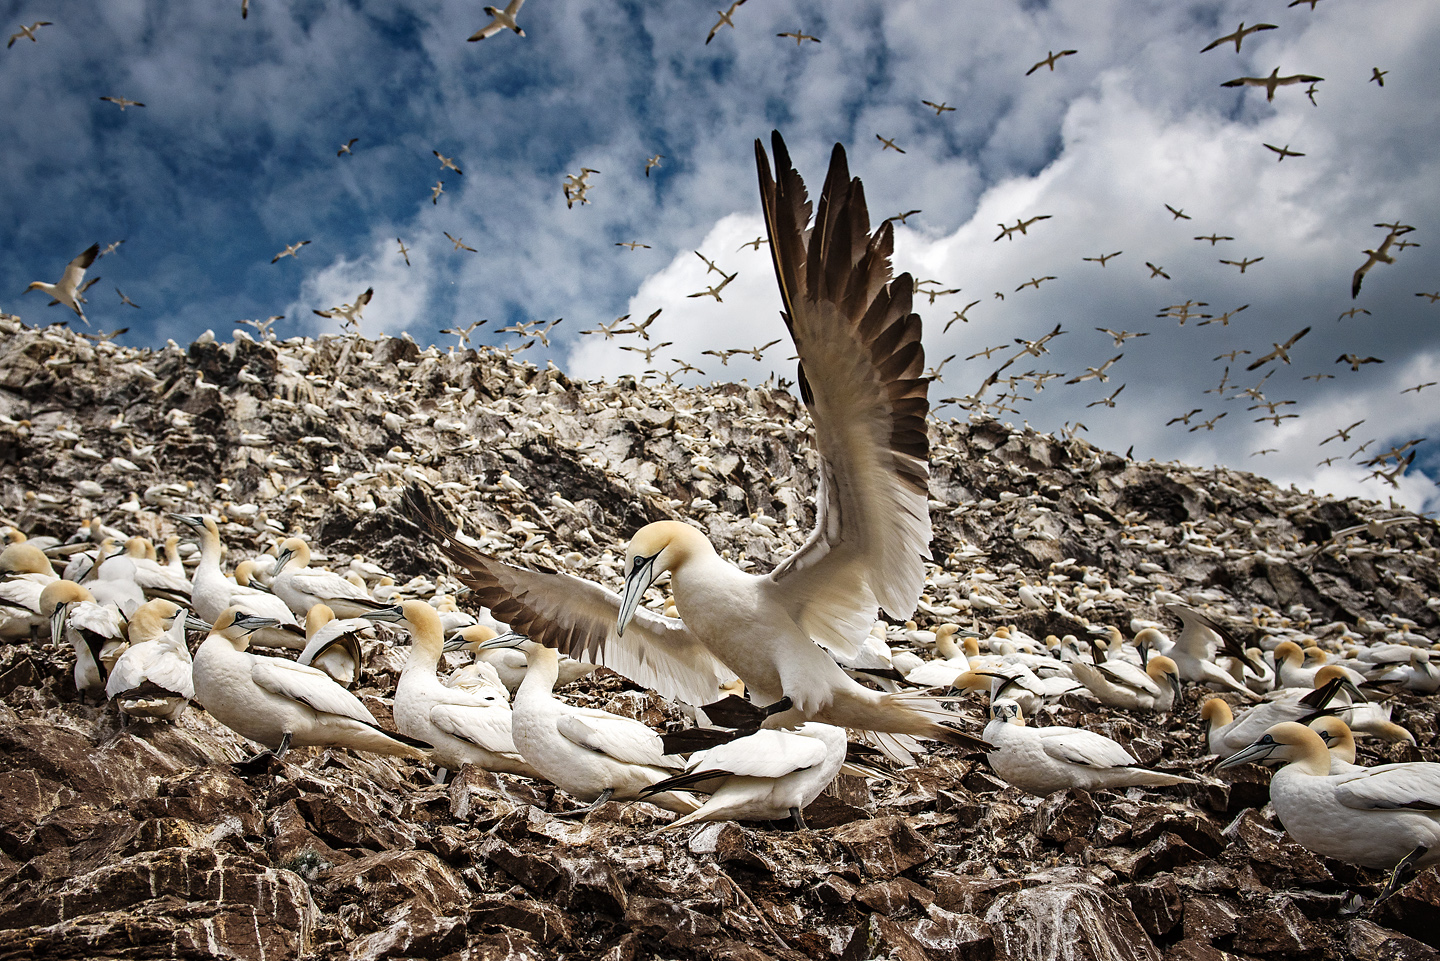  It has been said that the Bass Rock, home to a tenth of the world’s northern gannets is one of the wonders of the natural world. Preventing potential disturbance to this national treasure makes the current research of the utmost importance 